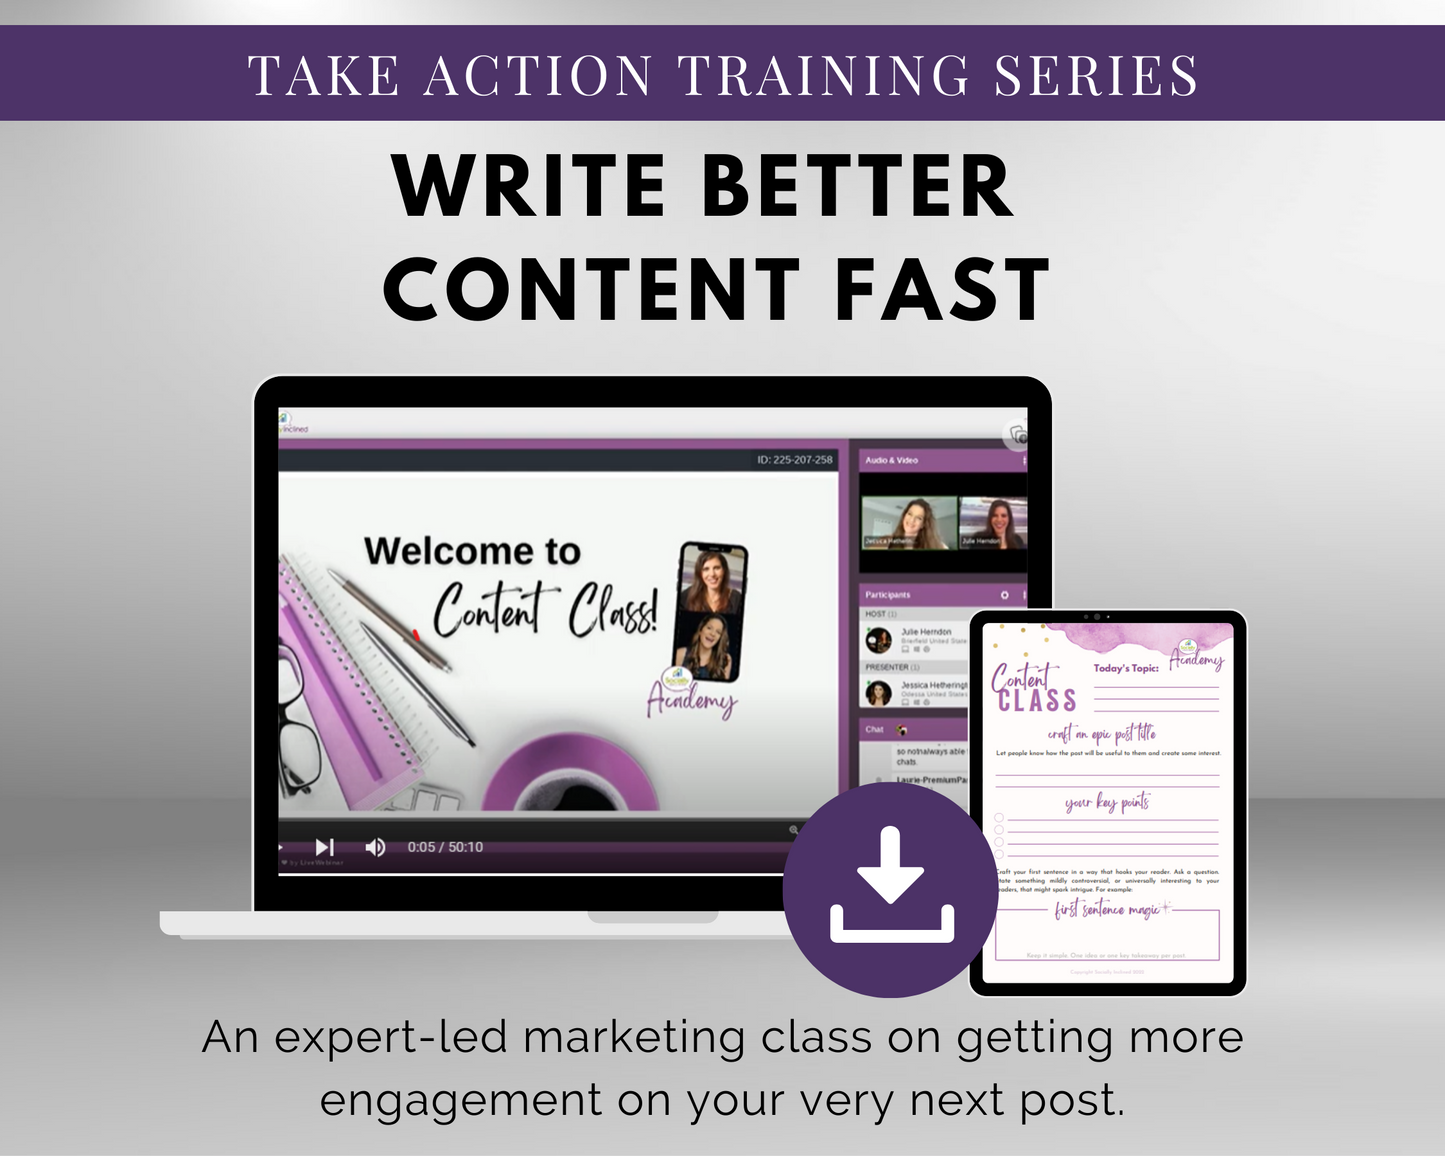 Write better content fast with the TAT - Write Better Content Fast Masterclass by Get Socially Inclined.